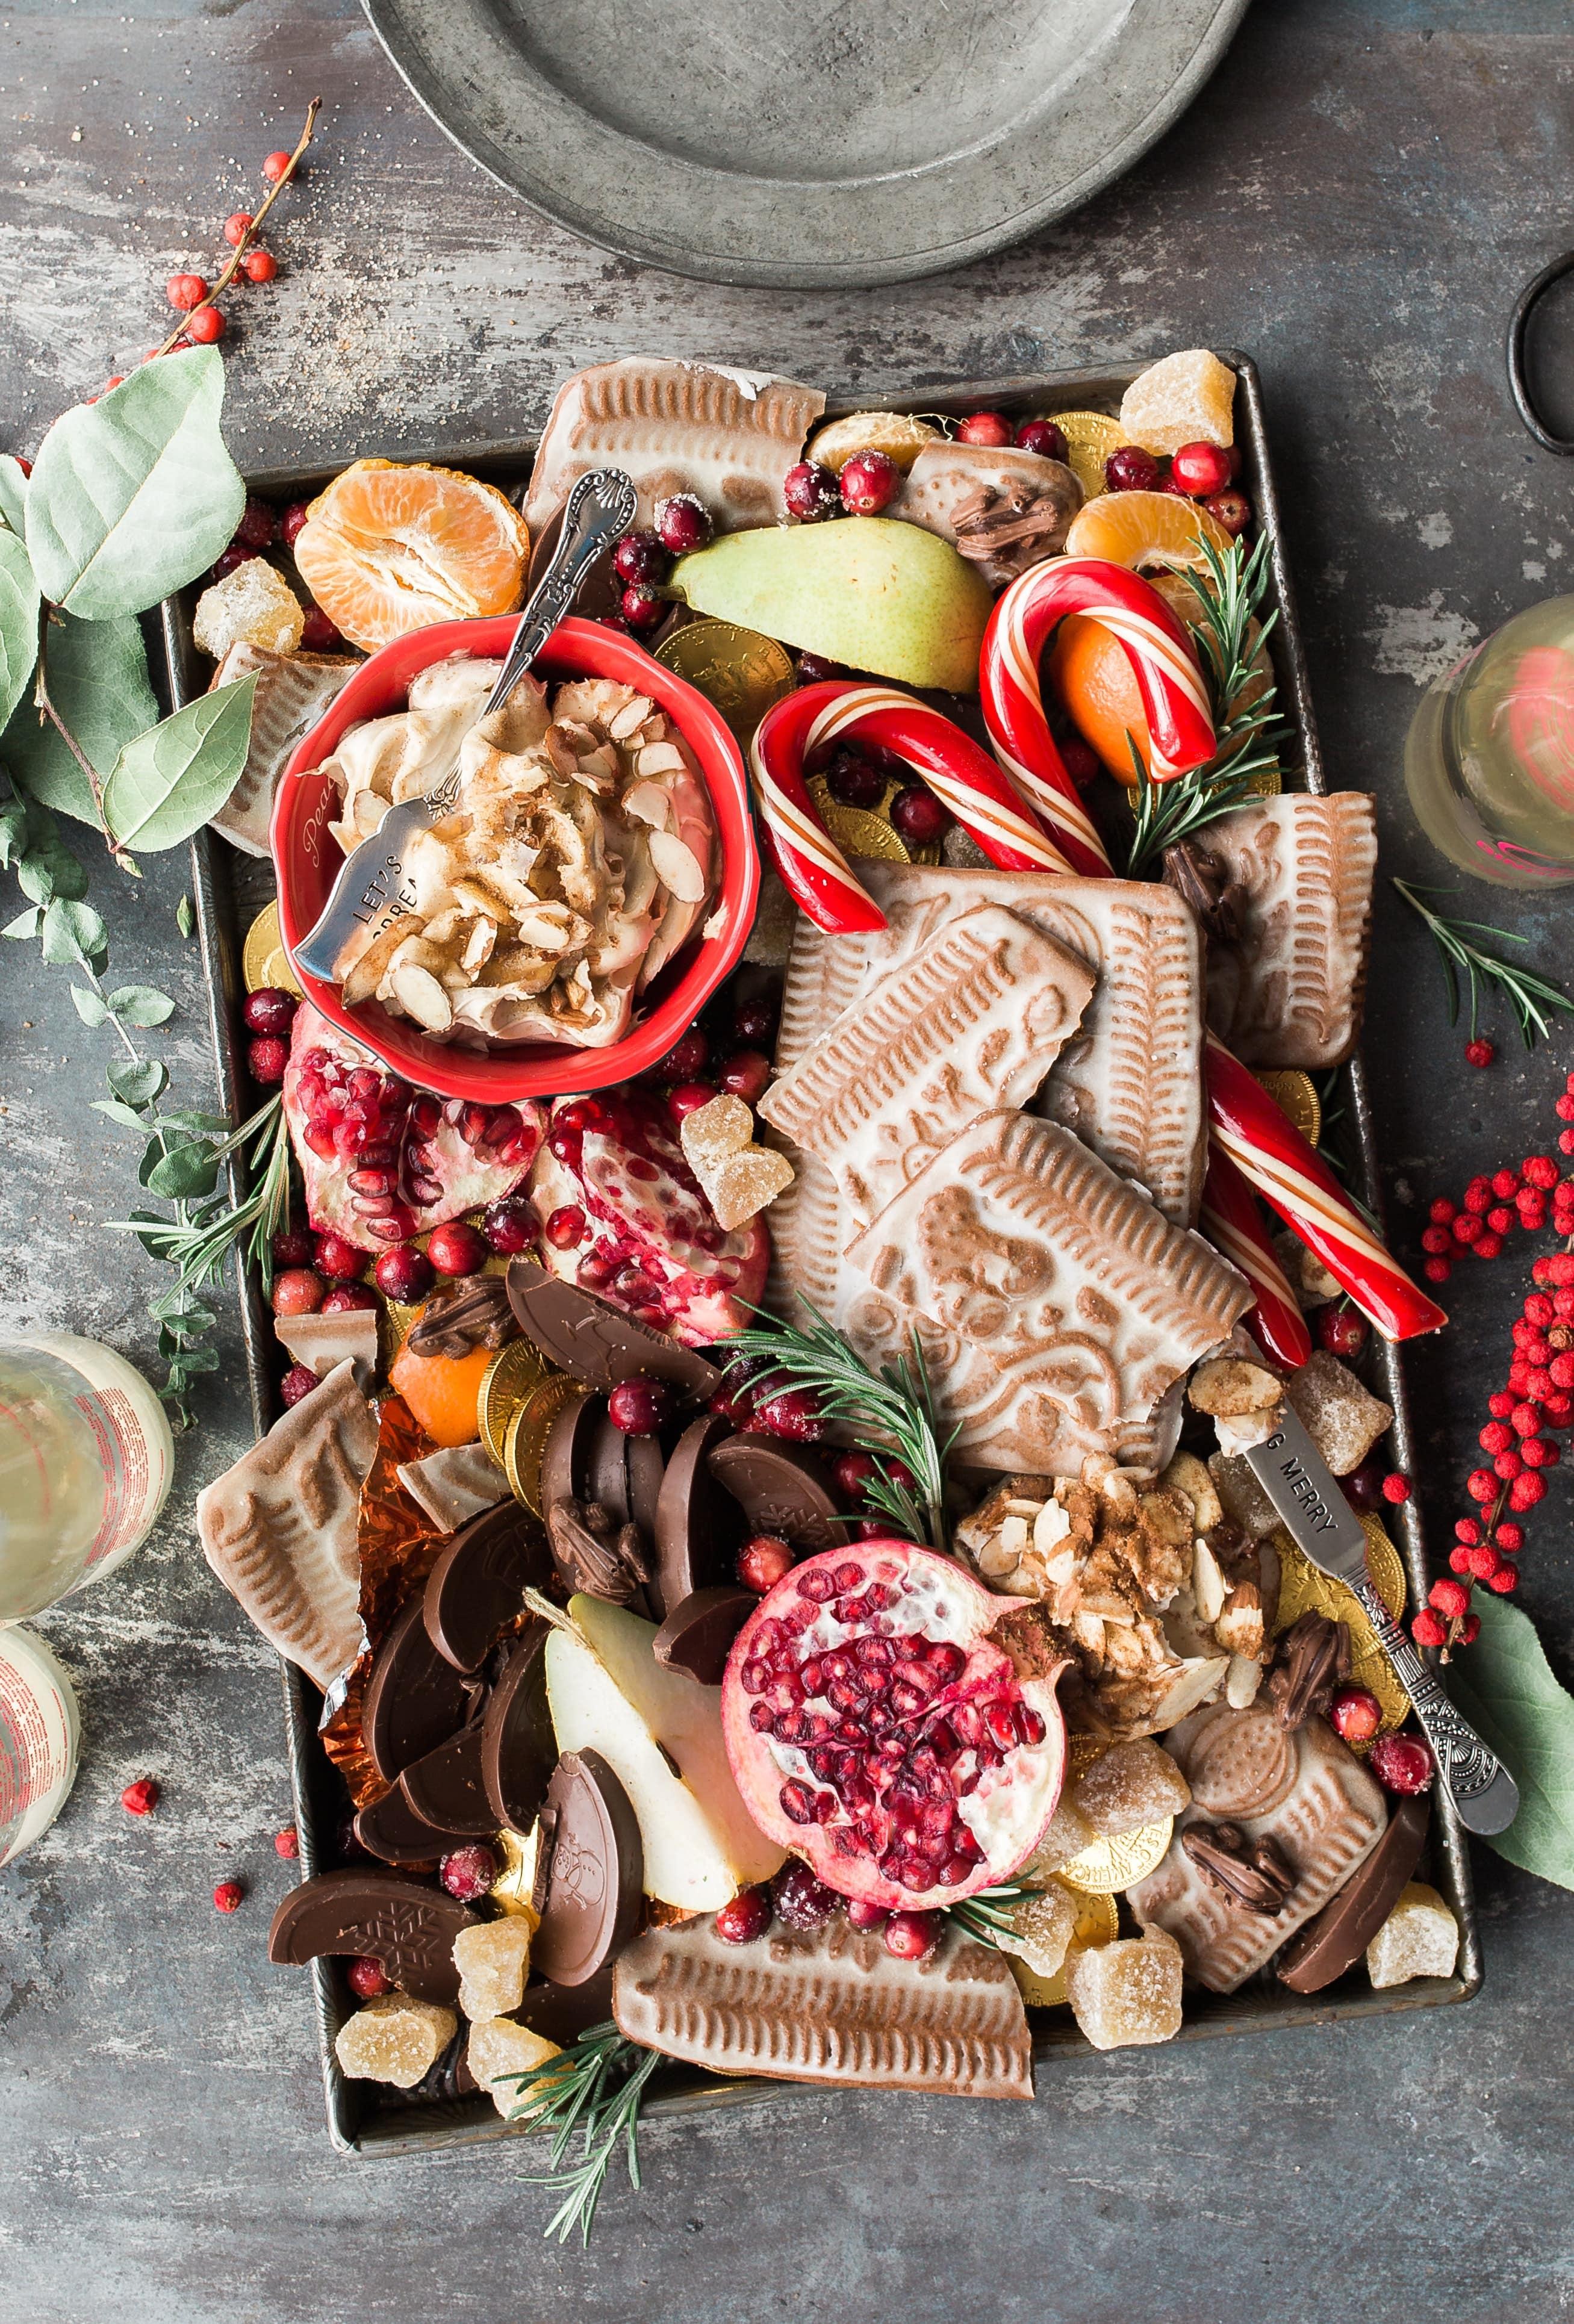 A tray of holiday treats including cookies, fruit, candies, and fresh herbs